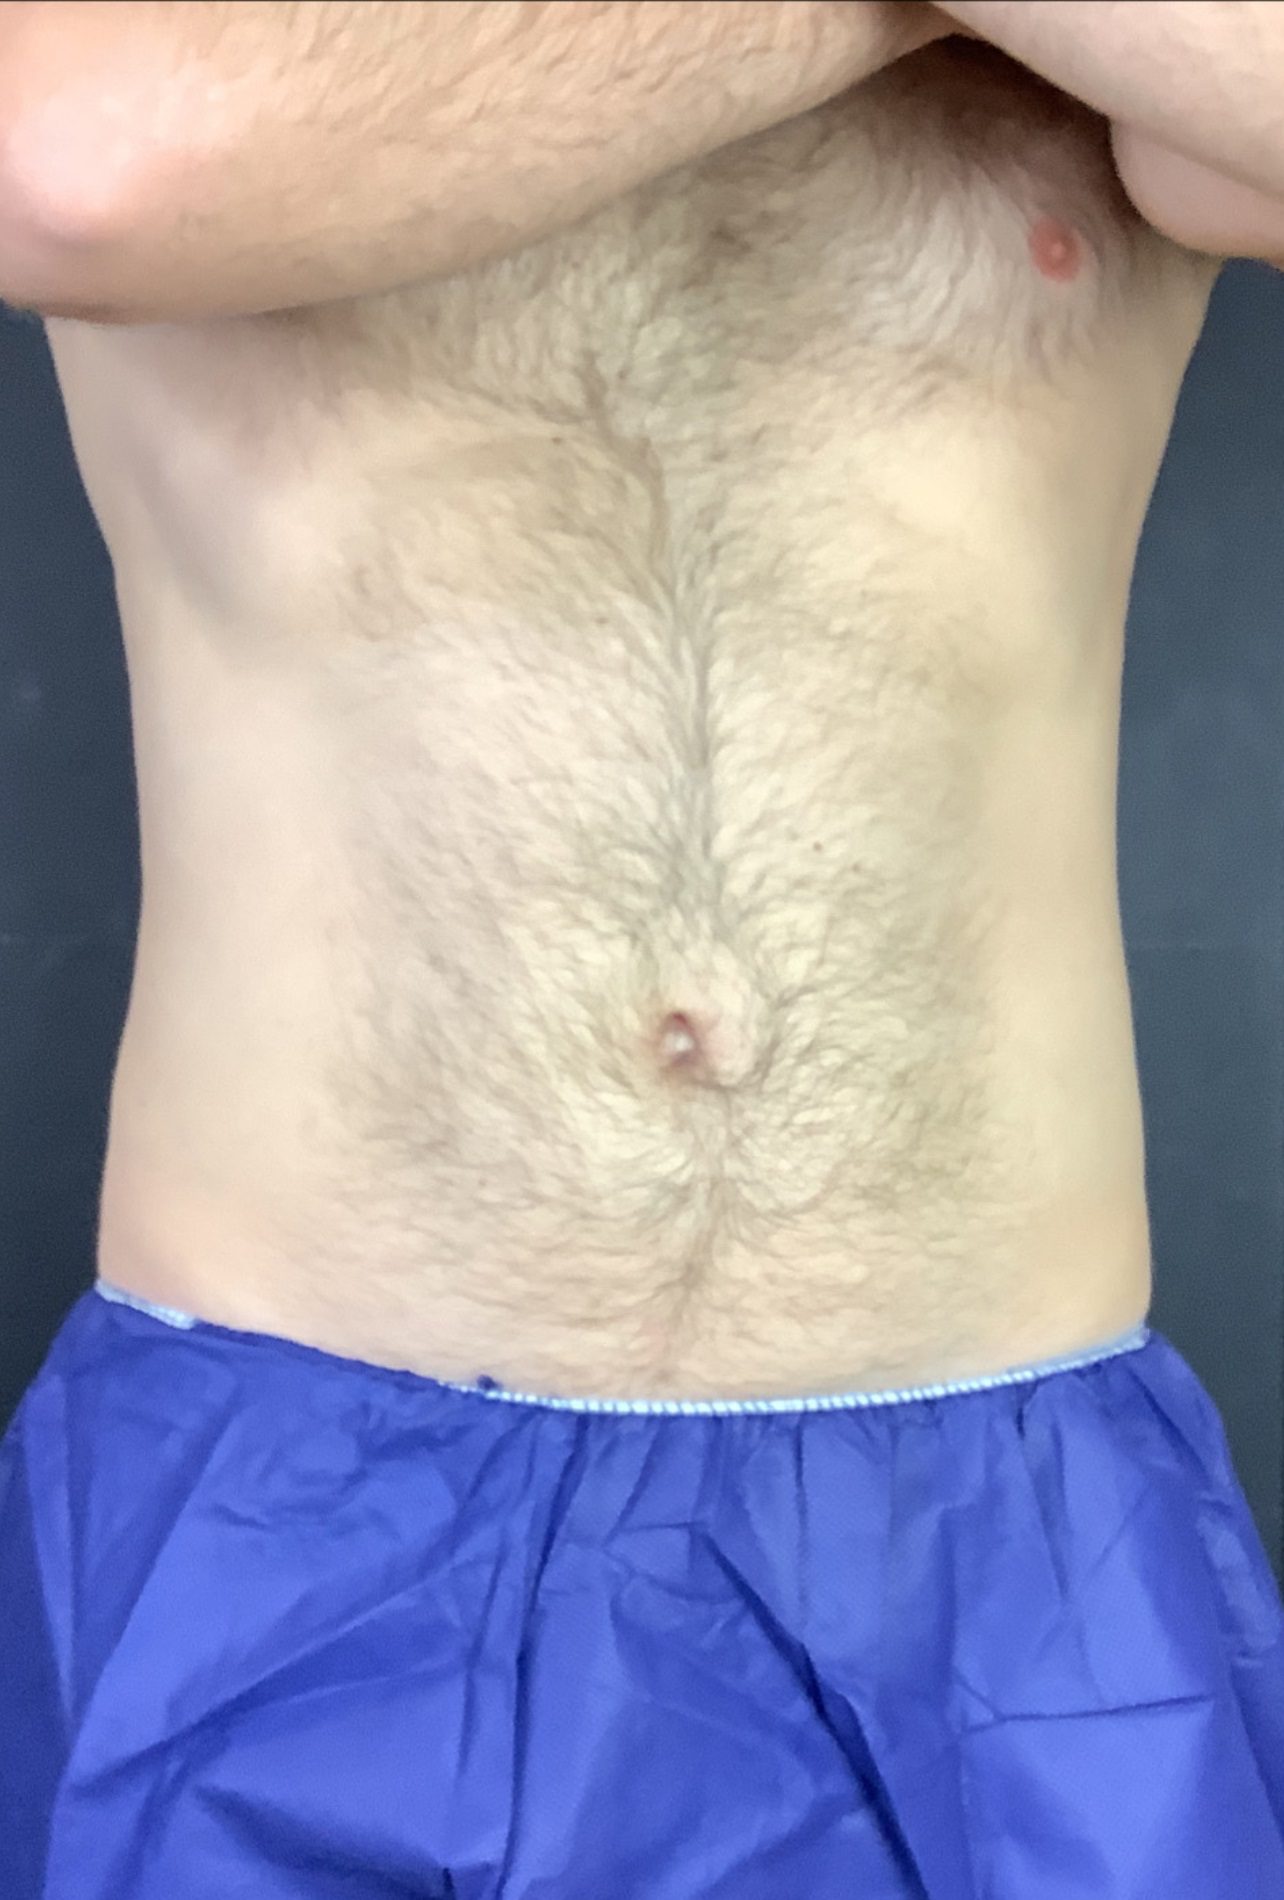 coolsculpting fat freezing muffin top flanks after